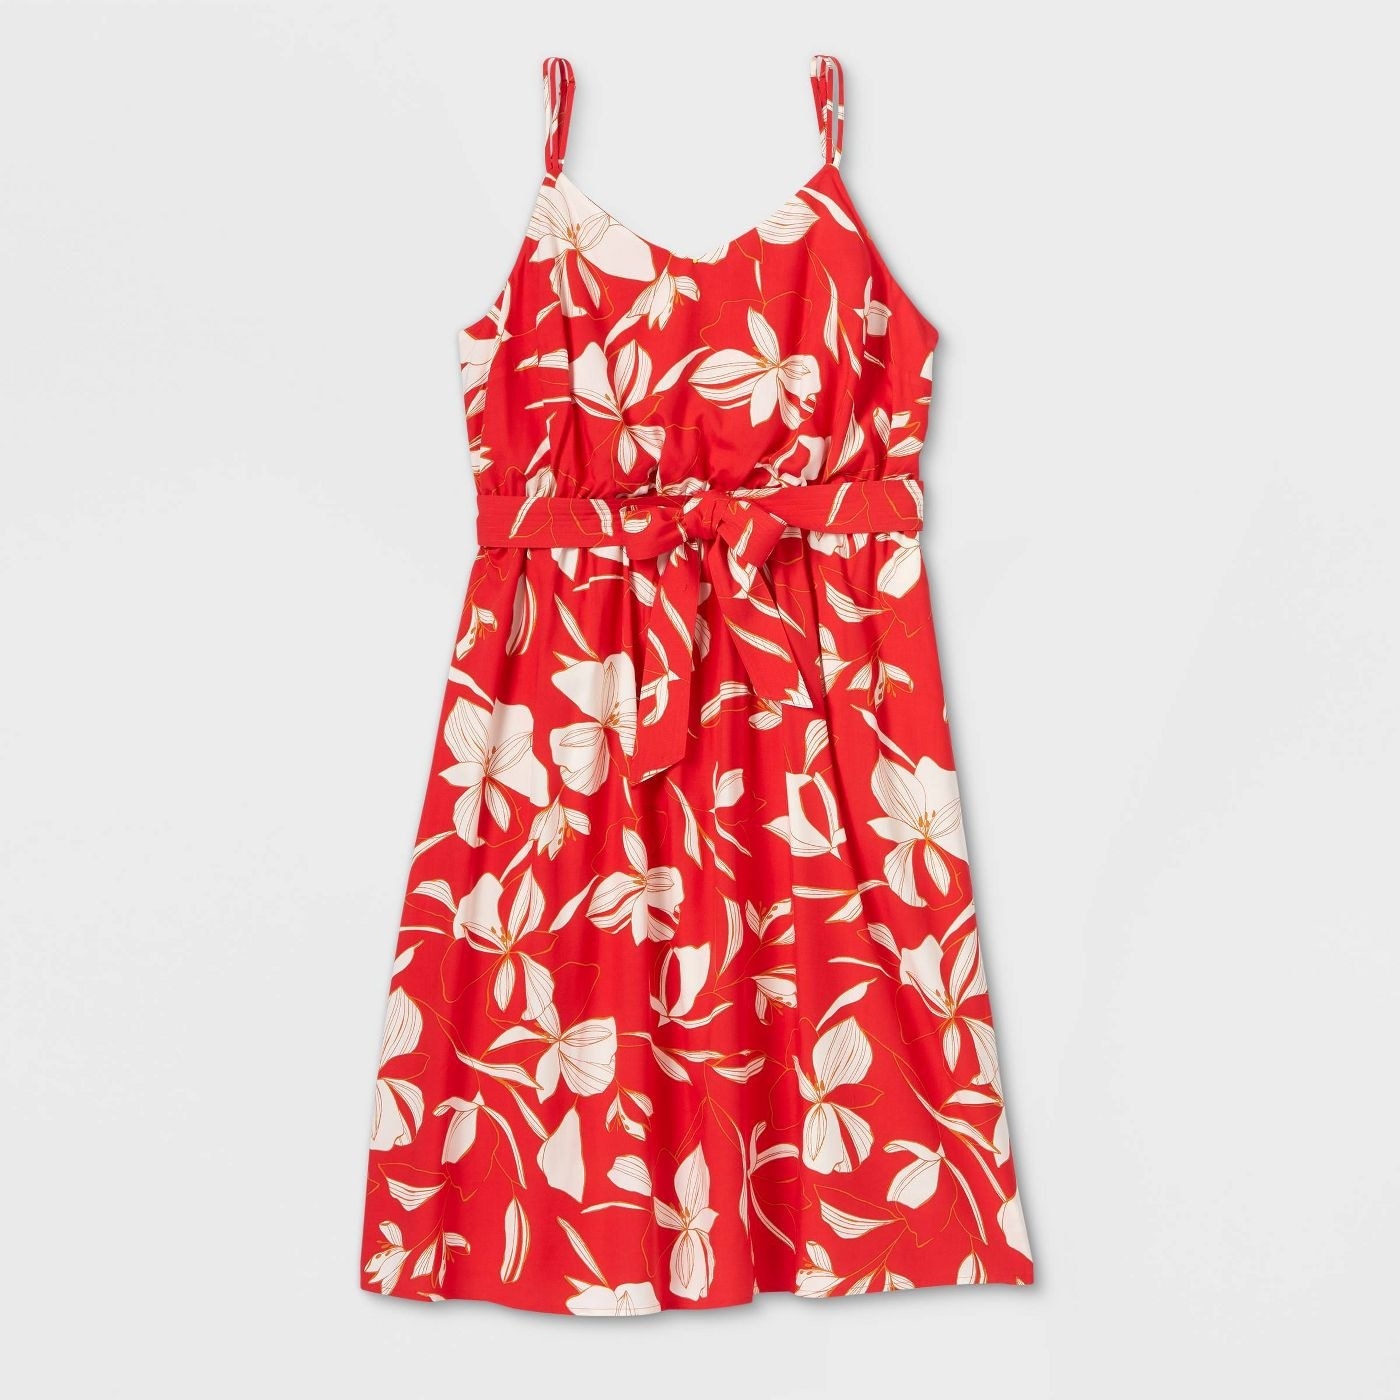 Red dress with white floral print and a bow at the waist 